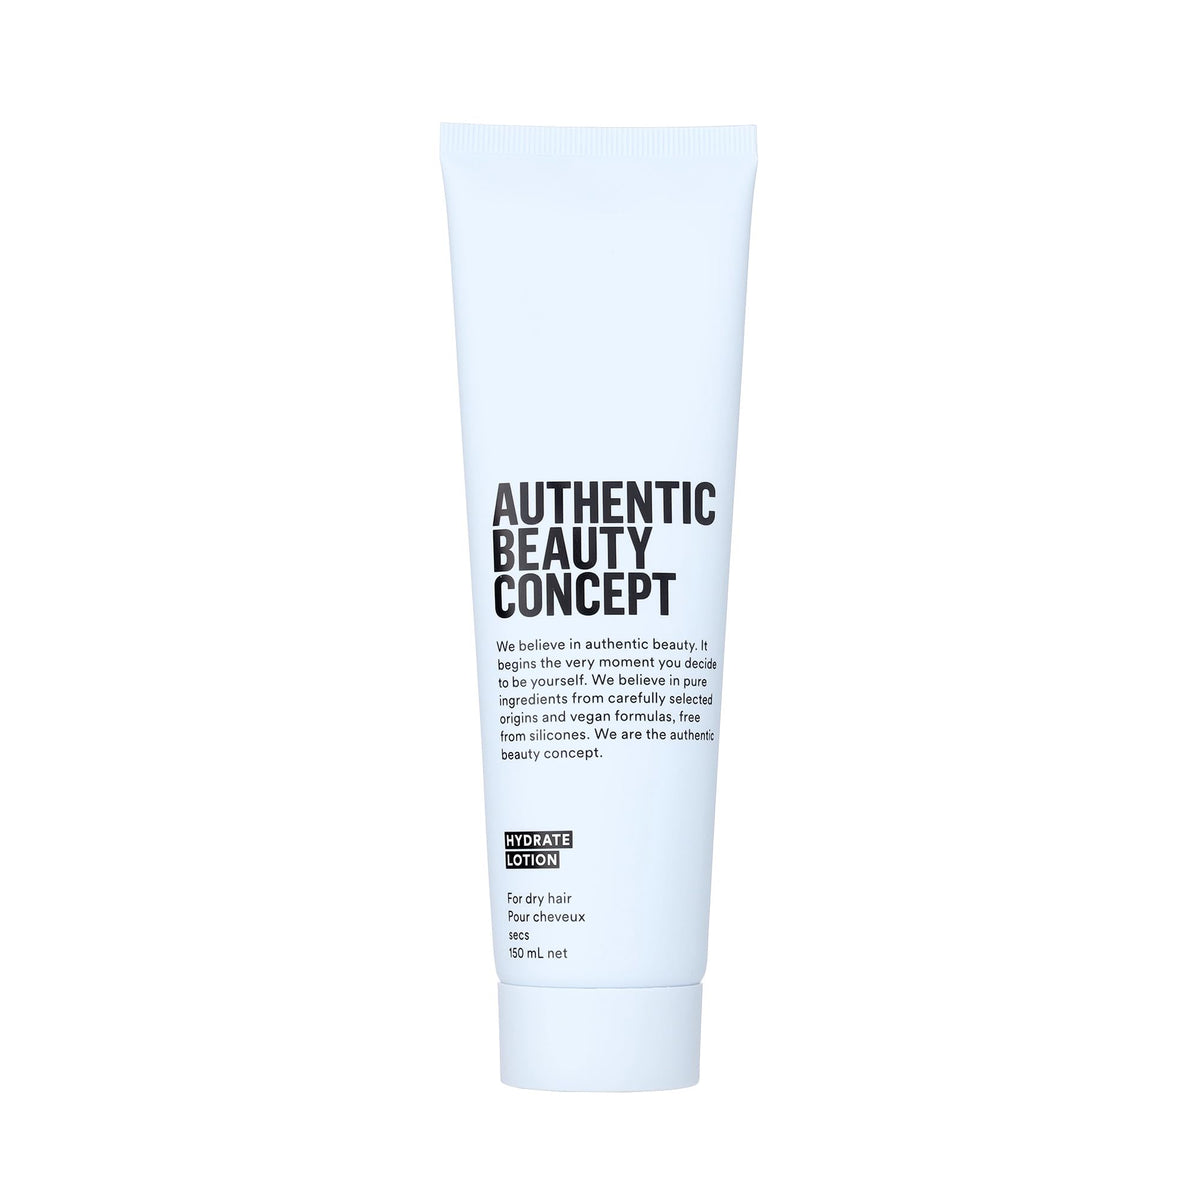 Authentic Beauty Concept Hydrate Lotion, Normal To Dry or Curly Hair, Heat Protection and Frizz Resistant, Vegan and Cruelty Free, Silicone Free, 5 fl. oz